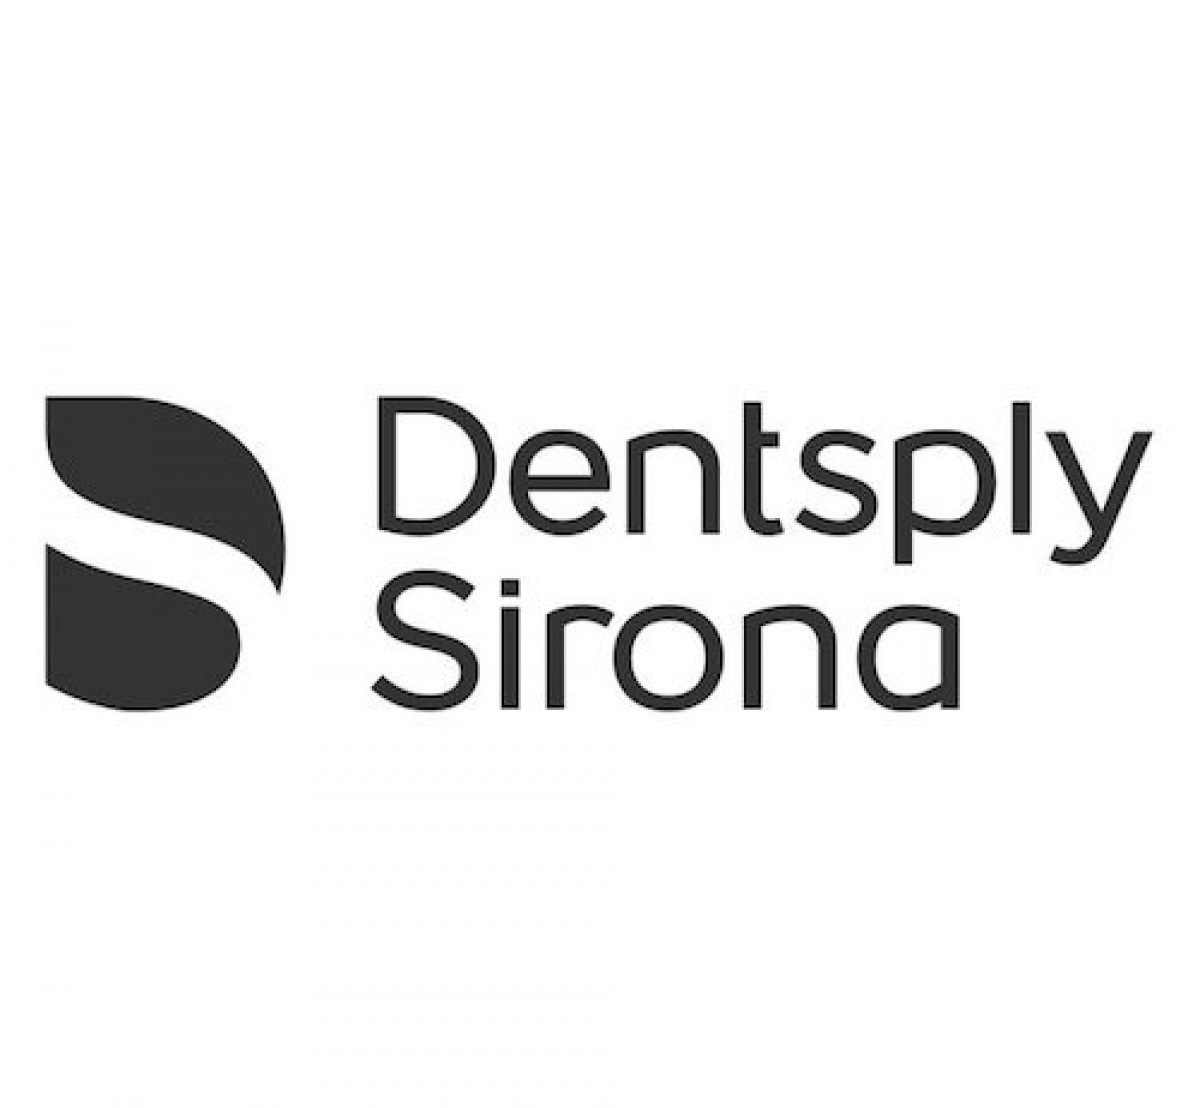 Dentsply Sirona supports dentists as they deliver much